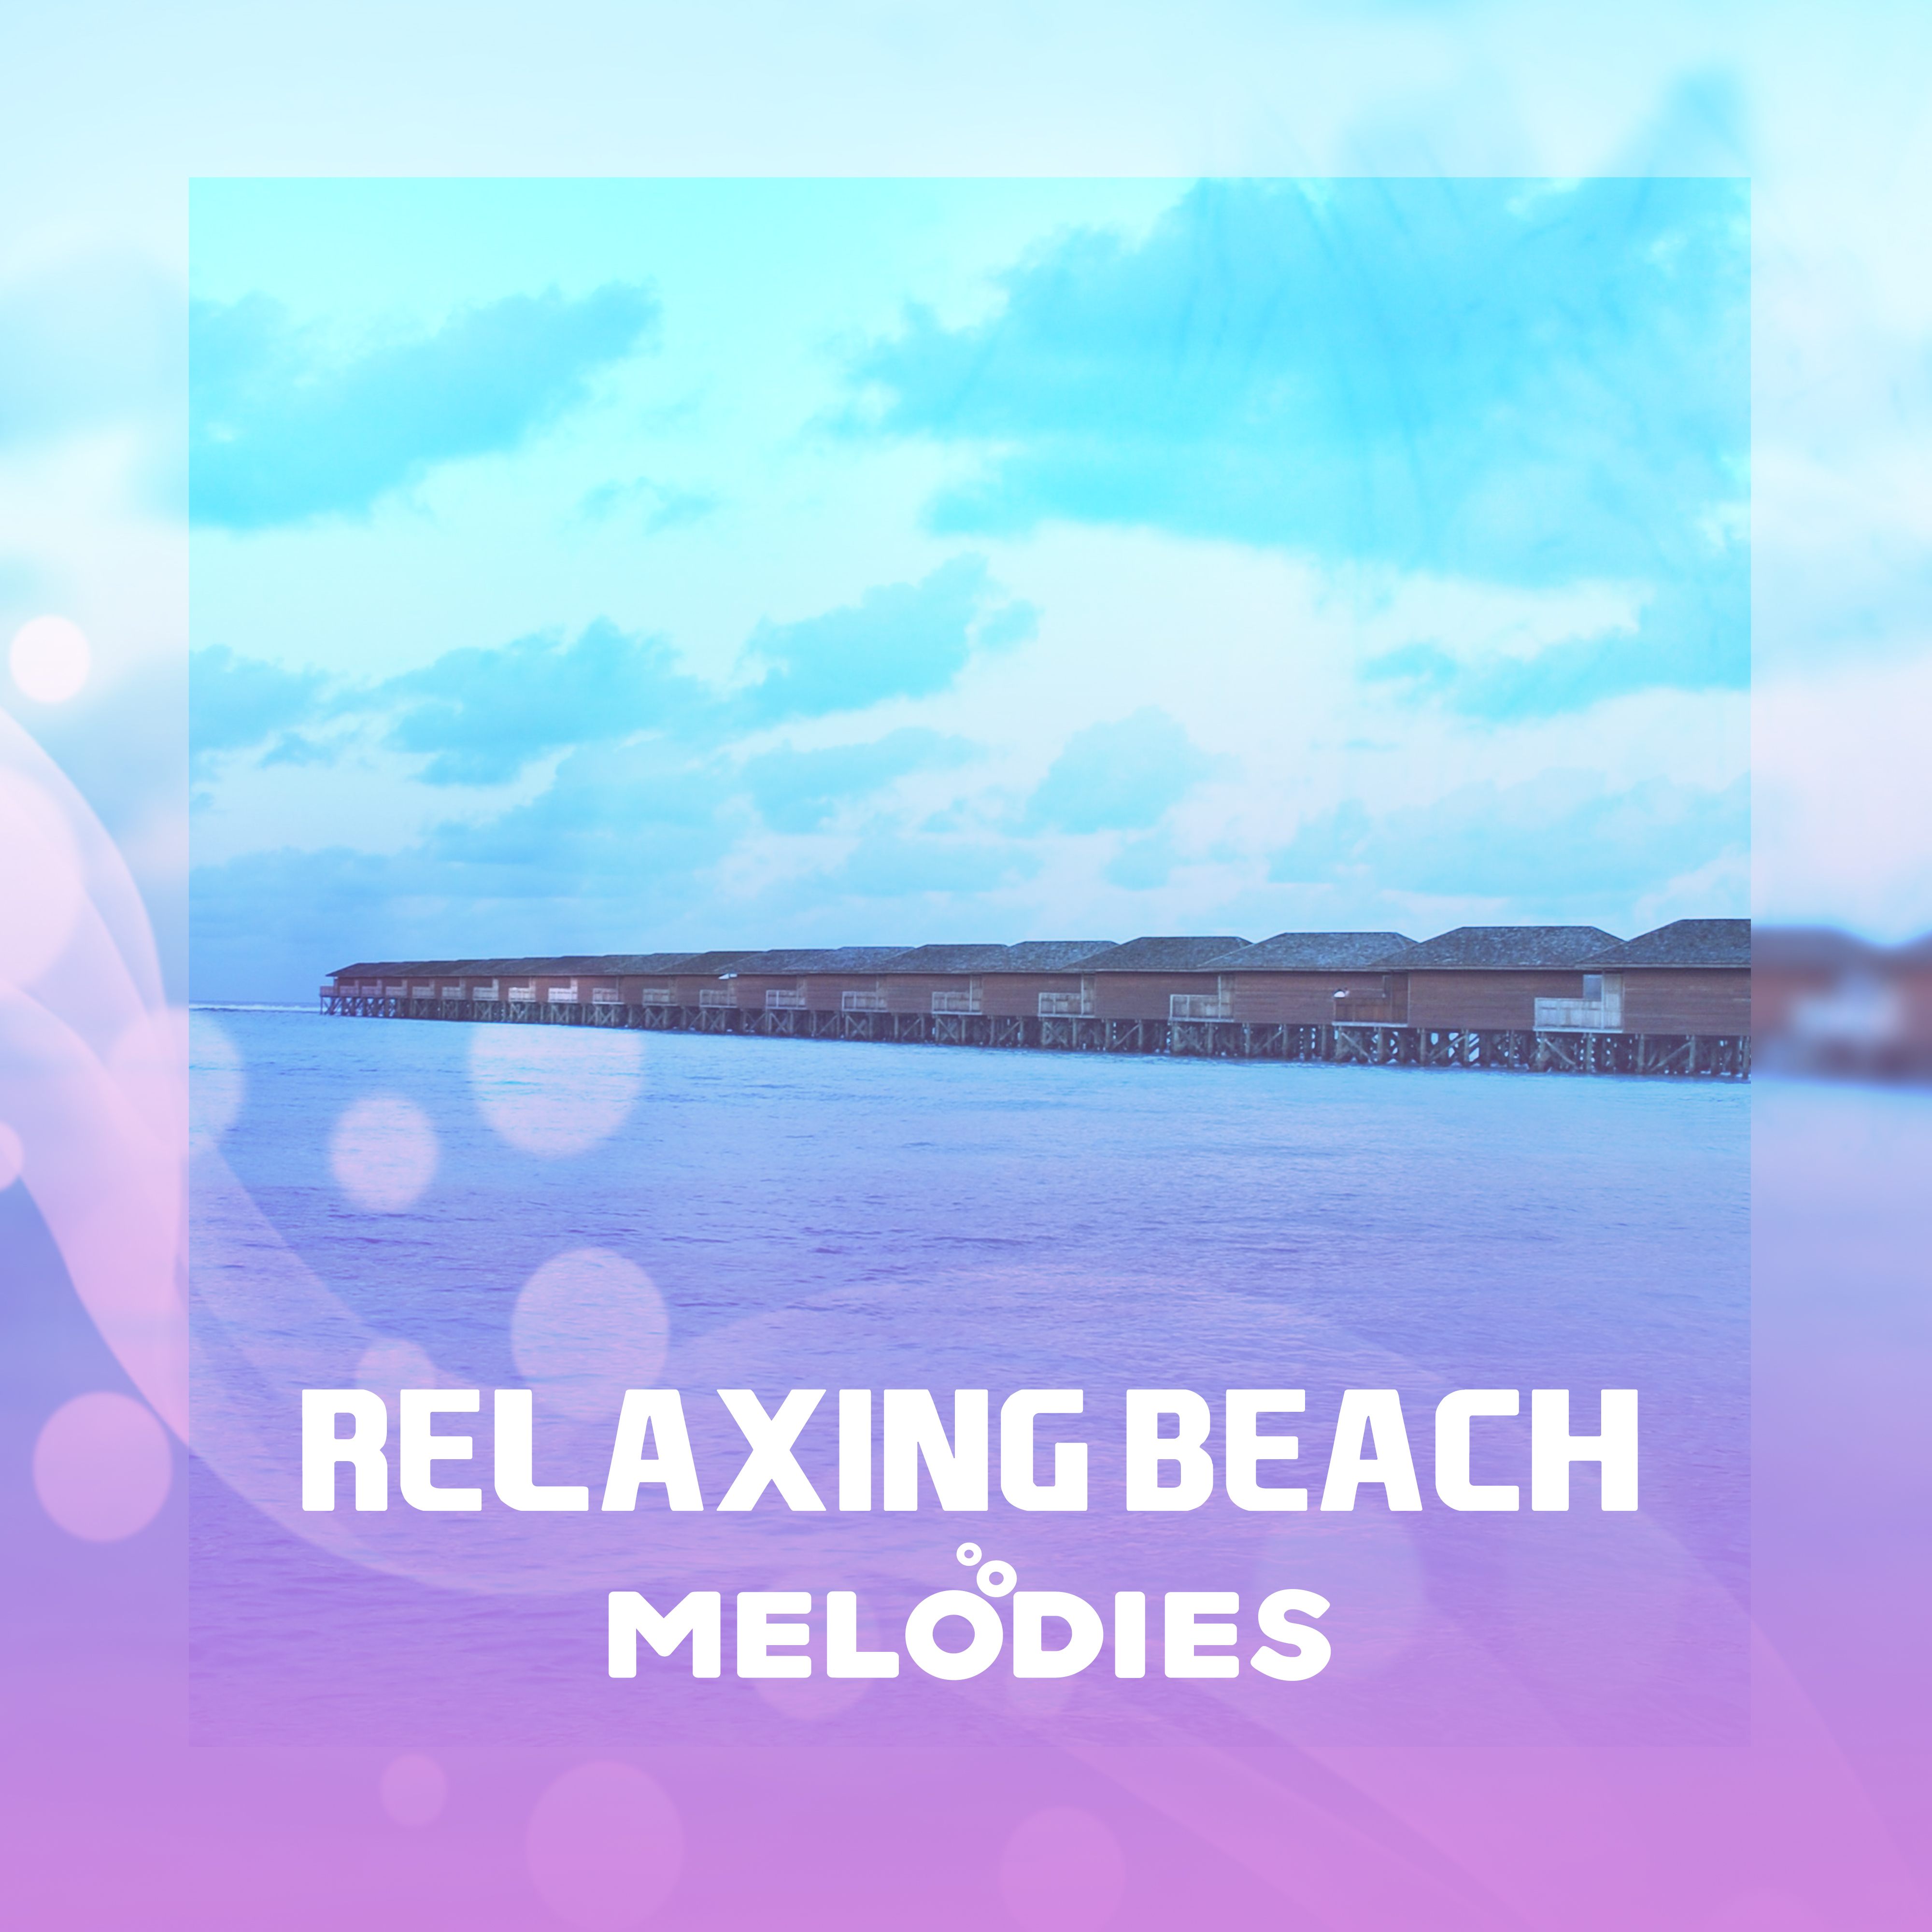 Relaxing Beach Melodies  Summer Chill Out Songs, Rest a Bit, Stress Relief, Peaceful Music